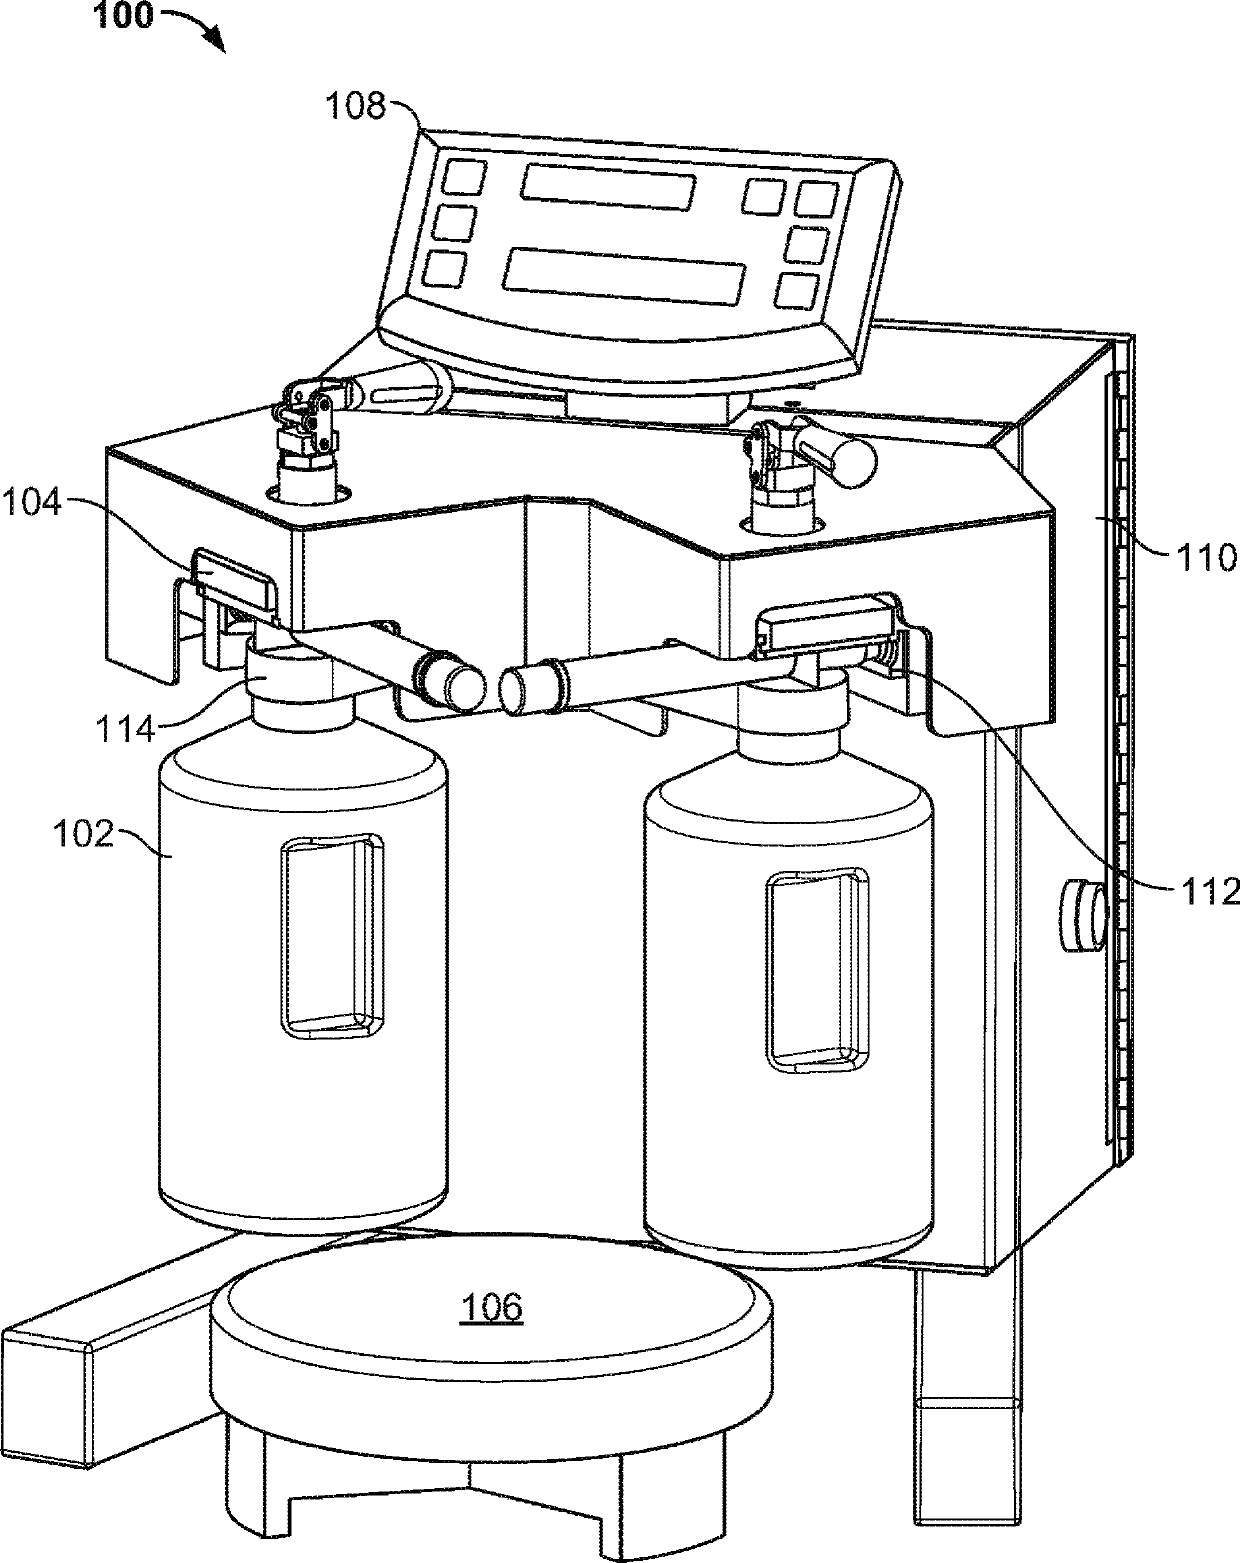 Lid and valve member, toner dispensing system and method